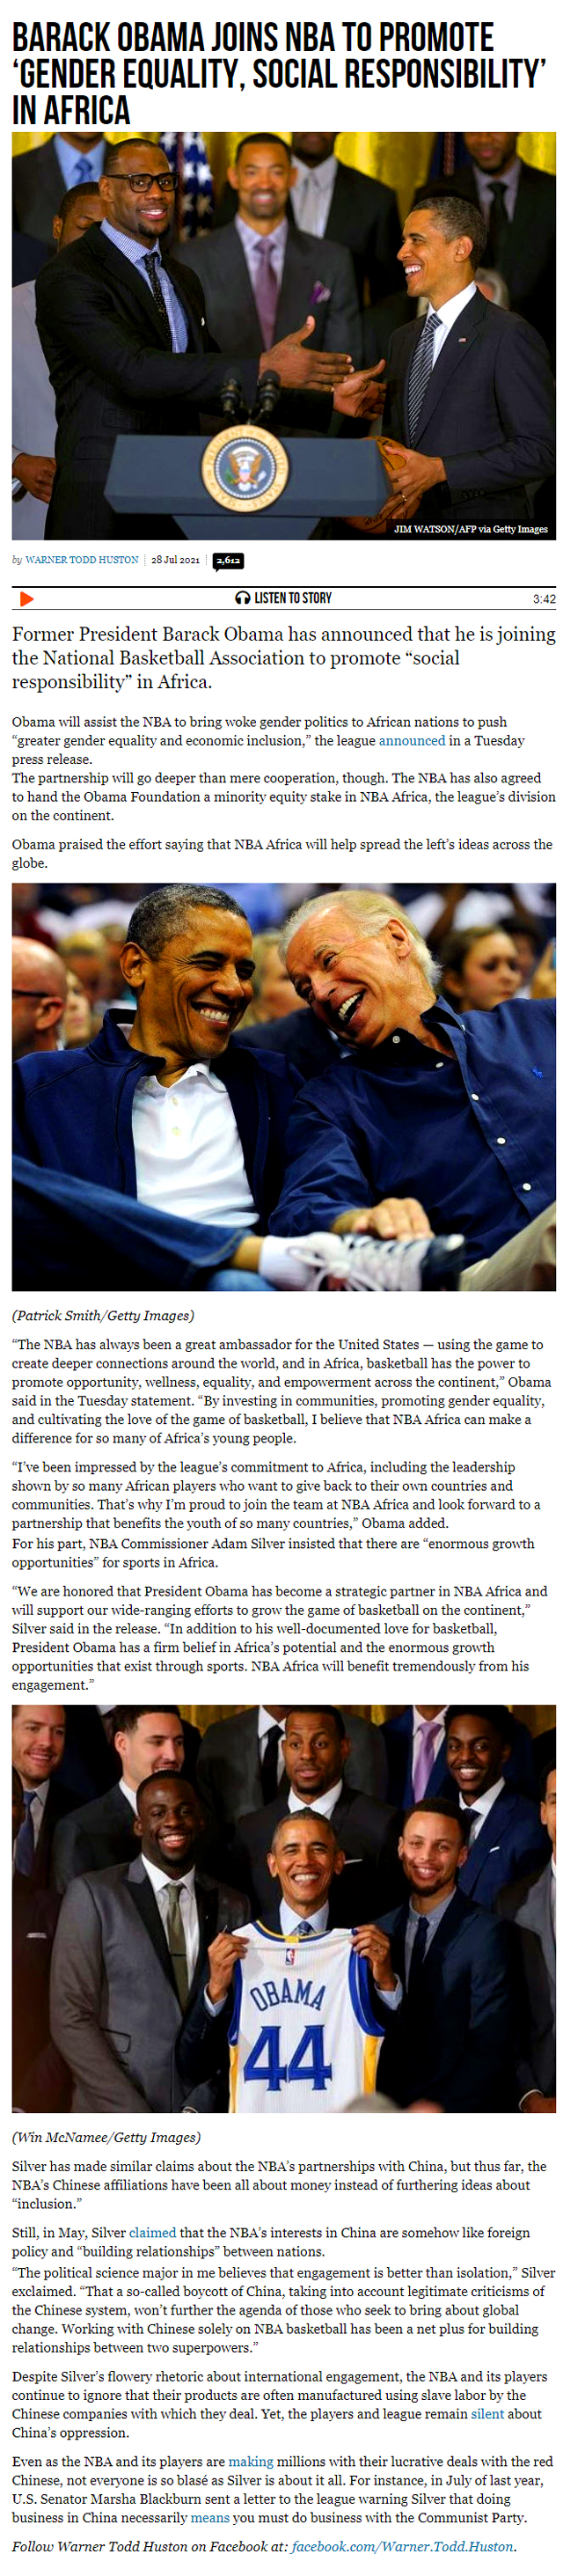 "Obama praised the effort saying that 'NBA Africa' will help spread the left’s ideas across the globe." - Breitbart 